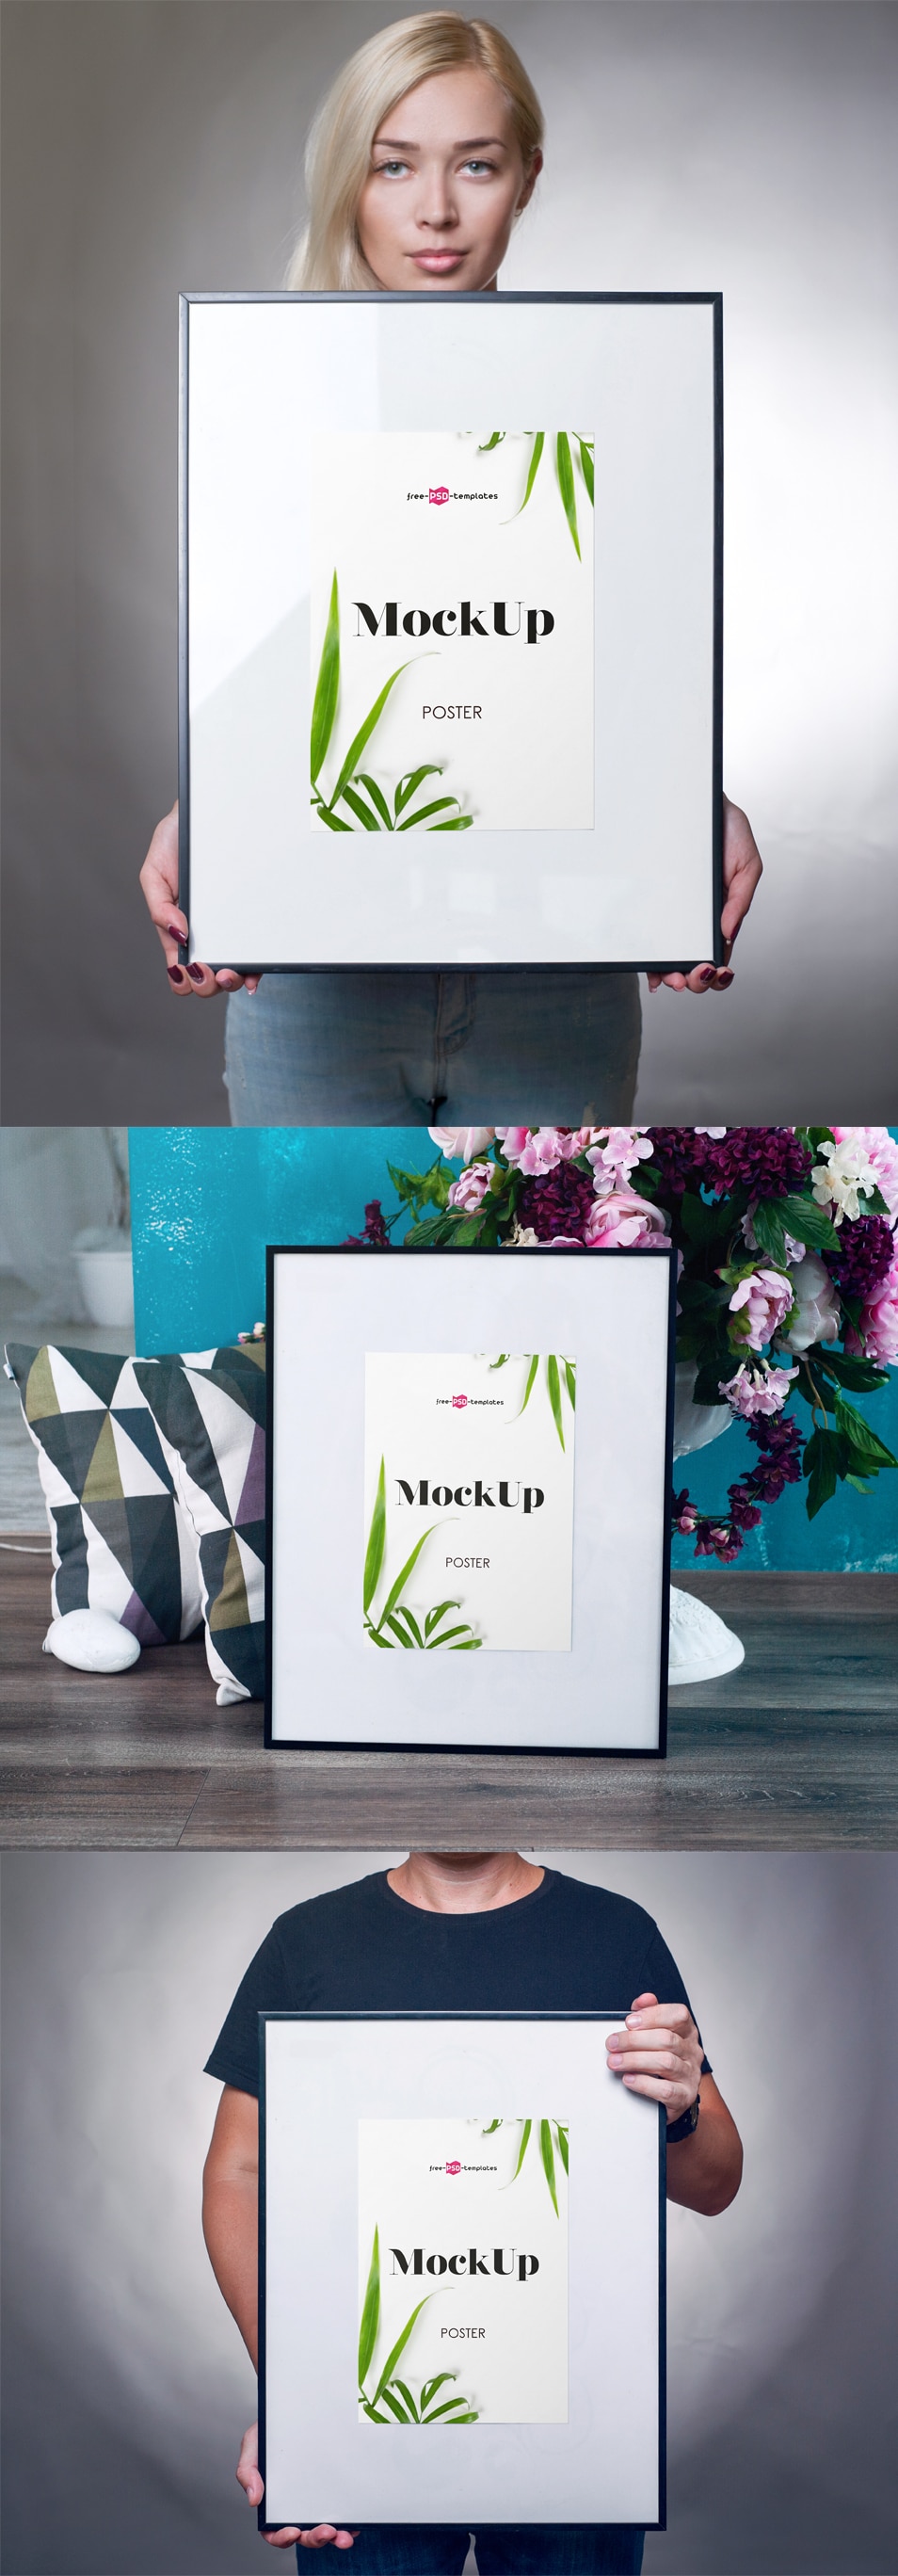 Download 3 Free Poster Mockups » CSS Author